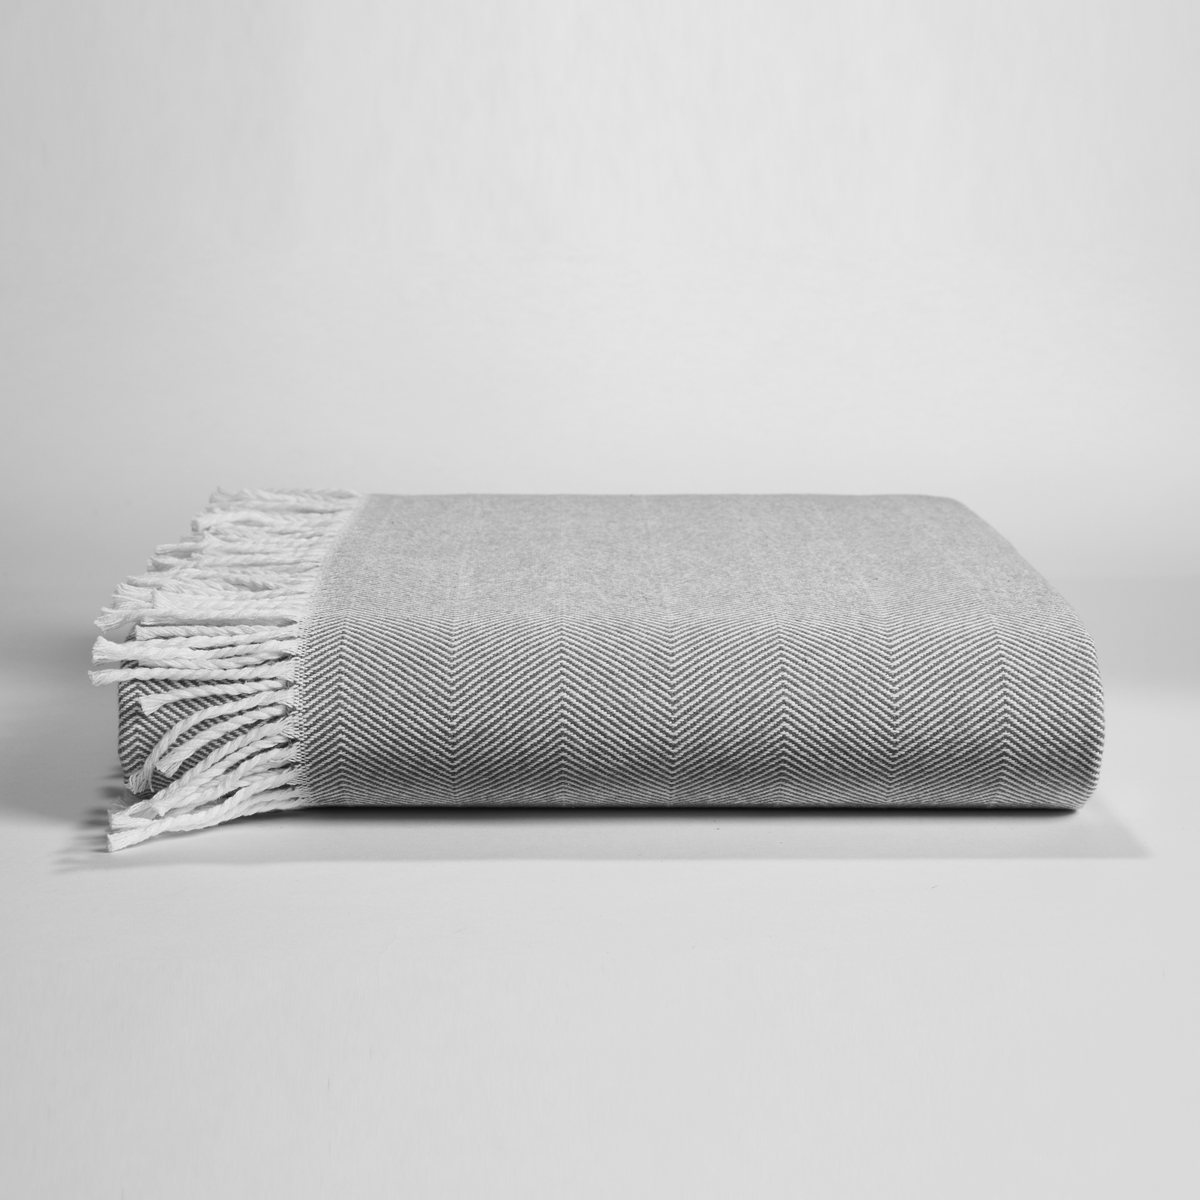 Clear Image of Downtown Company Herringbone Throw Charcoal in Gray White Color